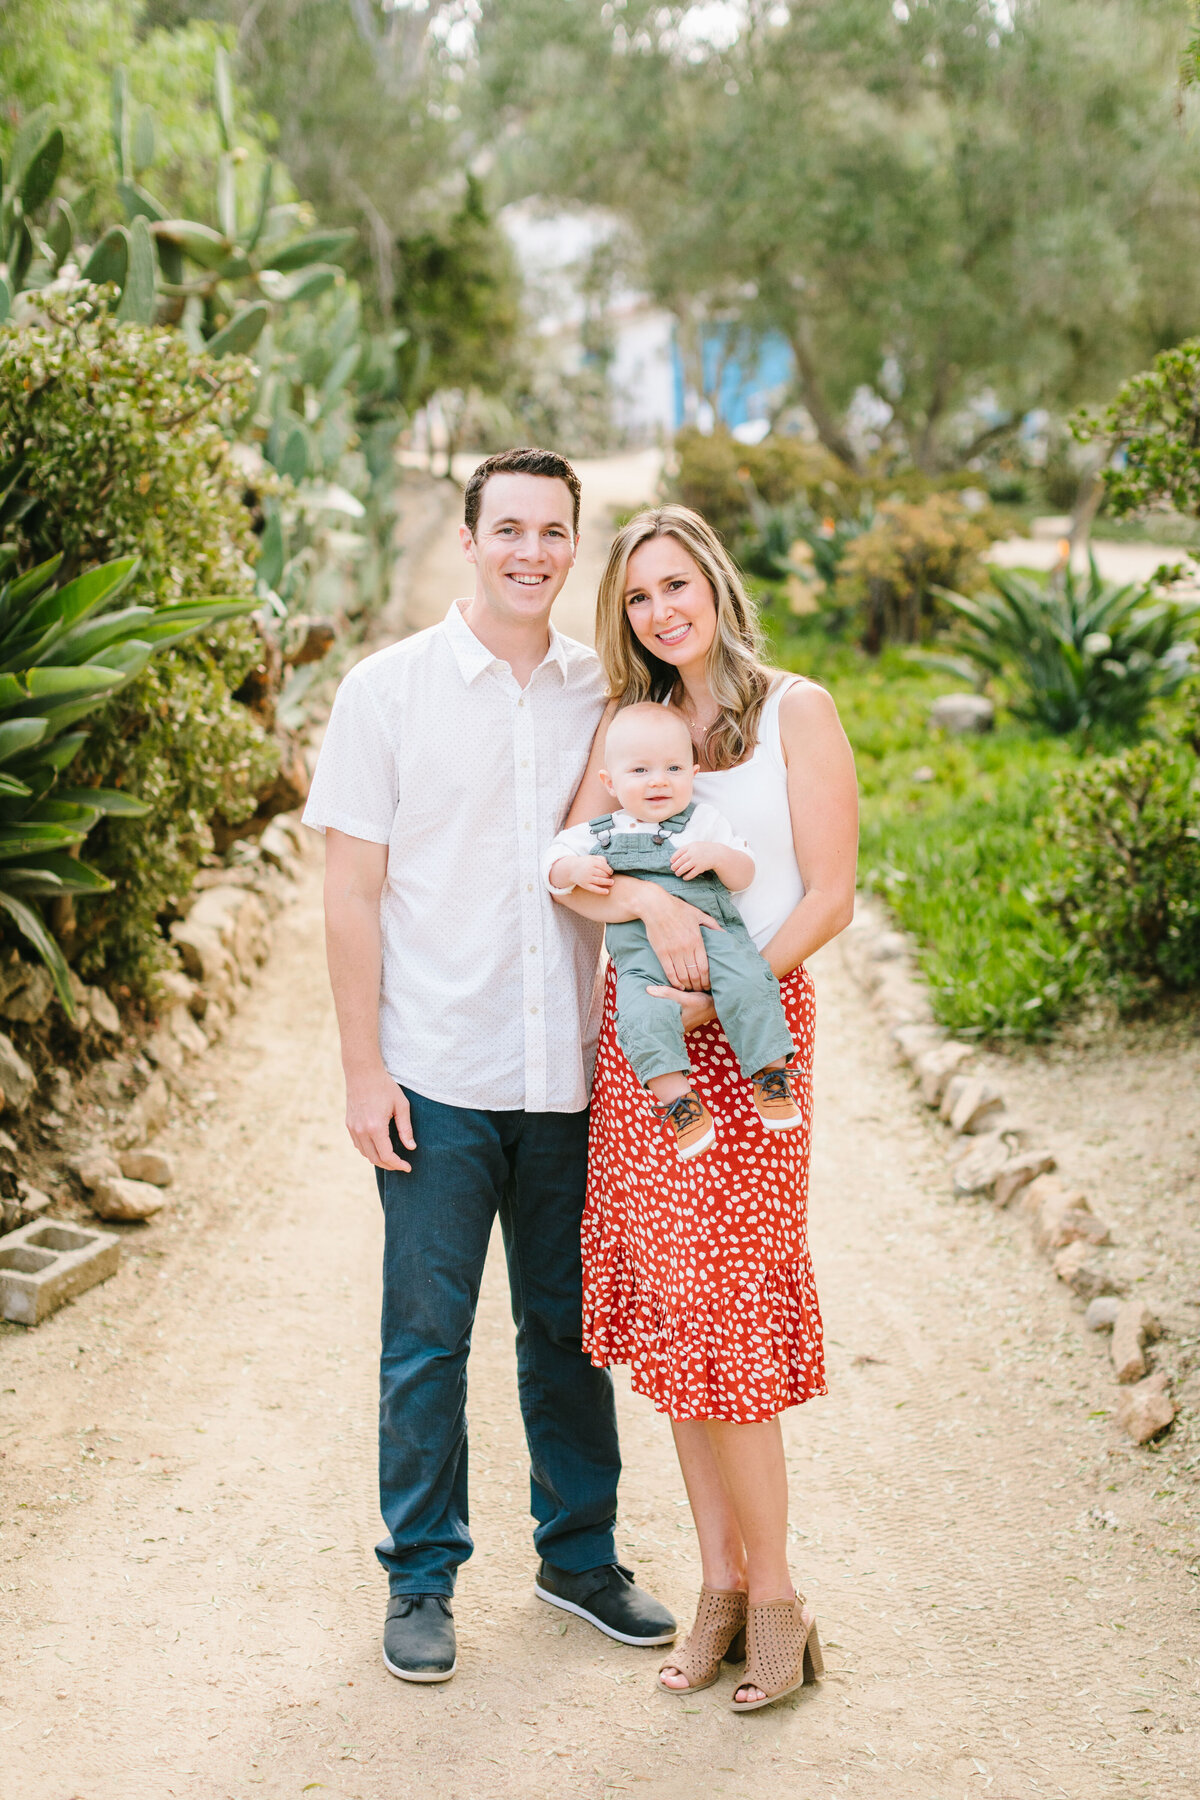 Best California and Texas Family Photographer-Jodee Debes Photography-275